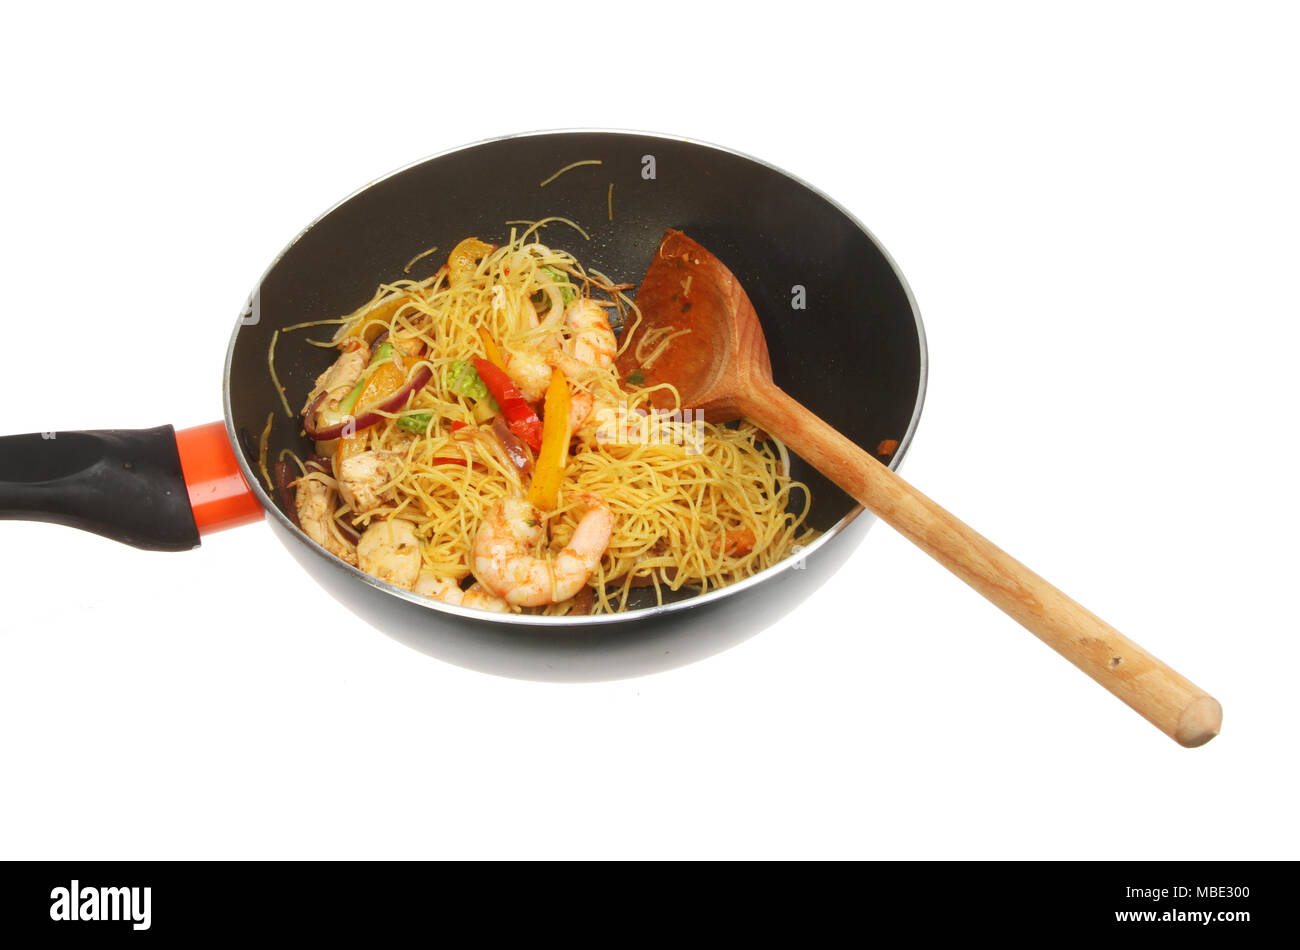 Singapore noodles prawns and stir fry vegetables in a wok with a wooden spoon isolated against white Stock Photo